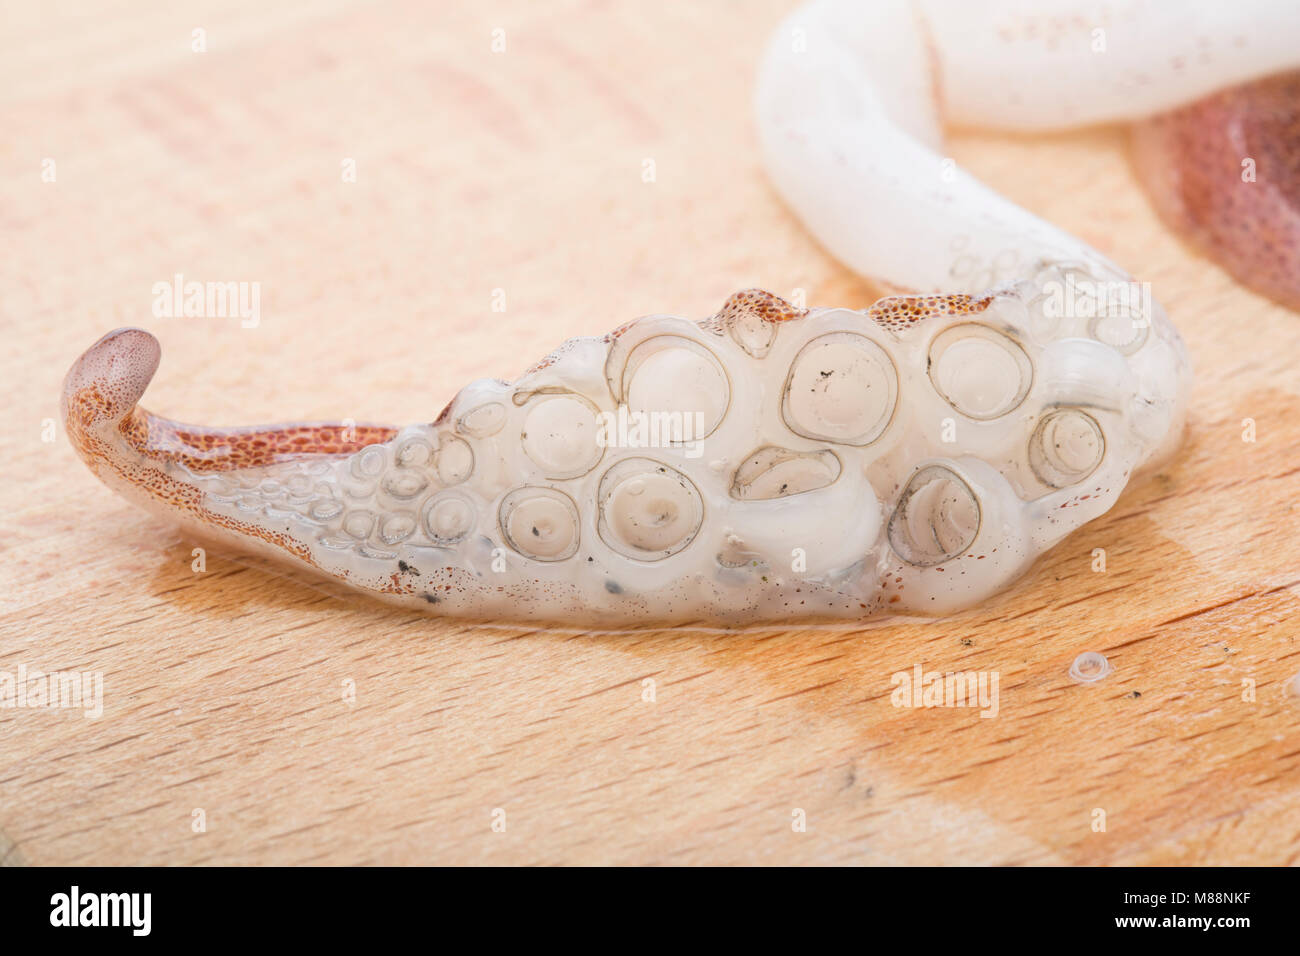 Loligo vulgaris squid tentacle caught near Weymouth, Dorset UK on rod and line. They are popular with commercial and recreational anglers. Stock Photo